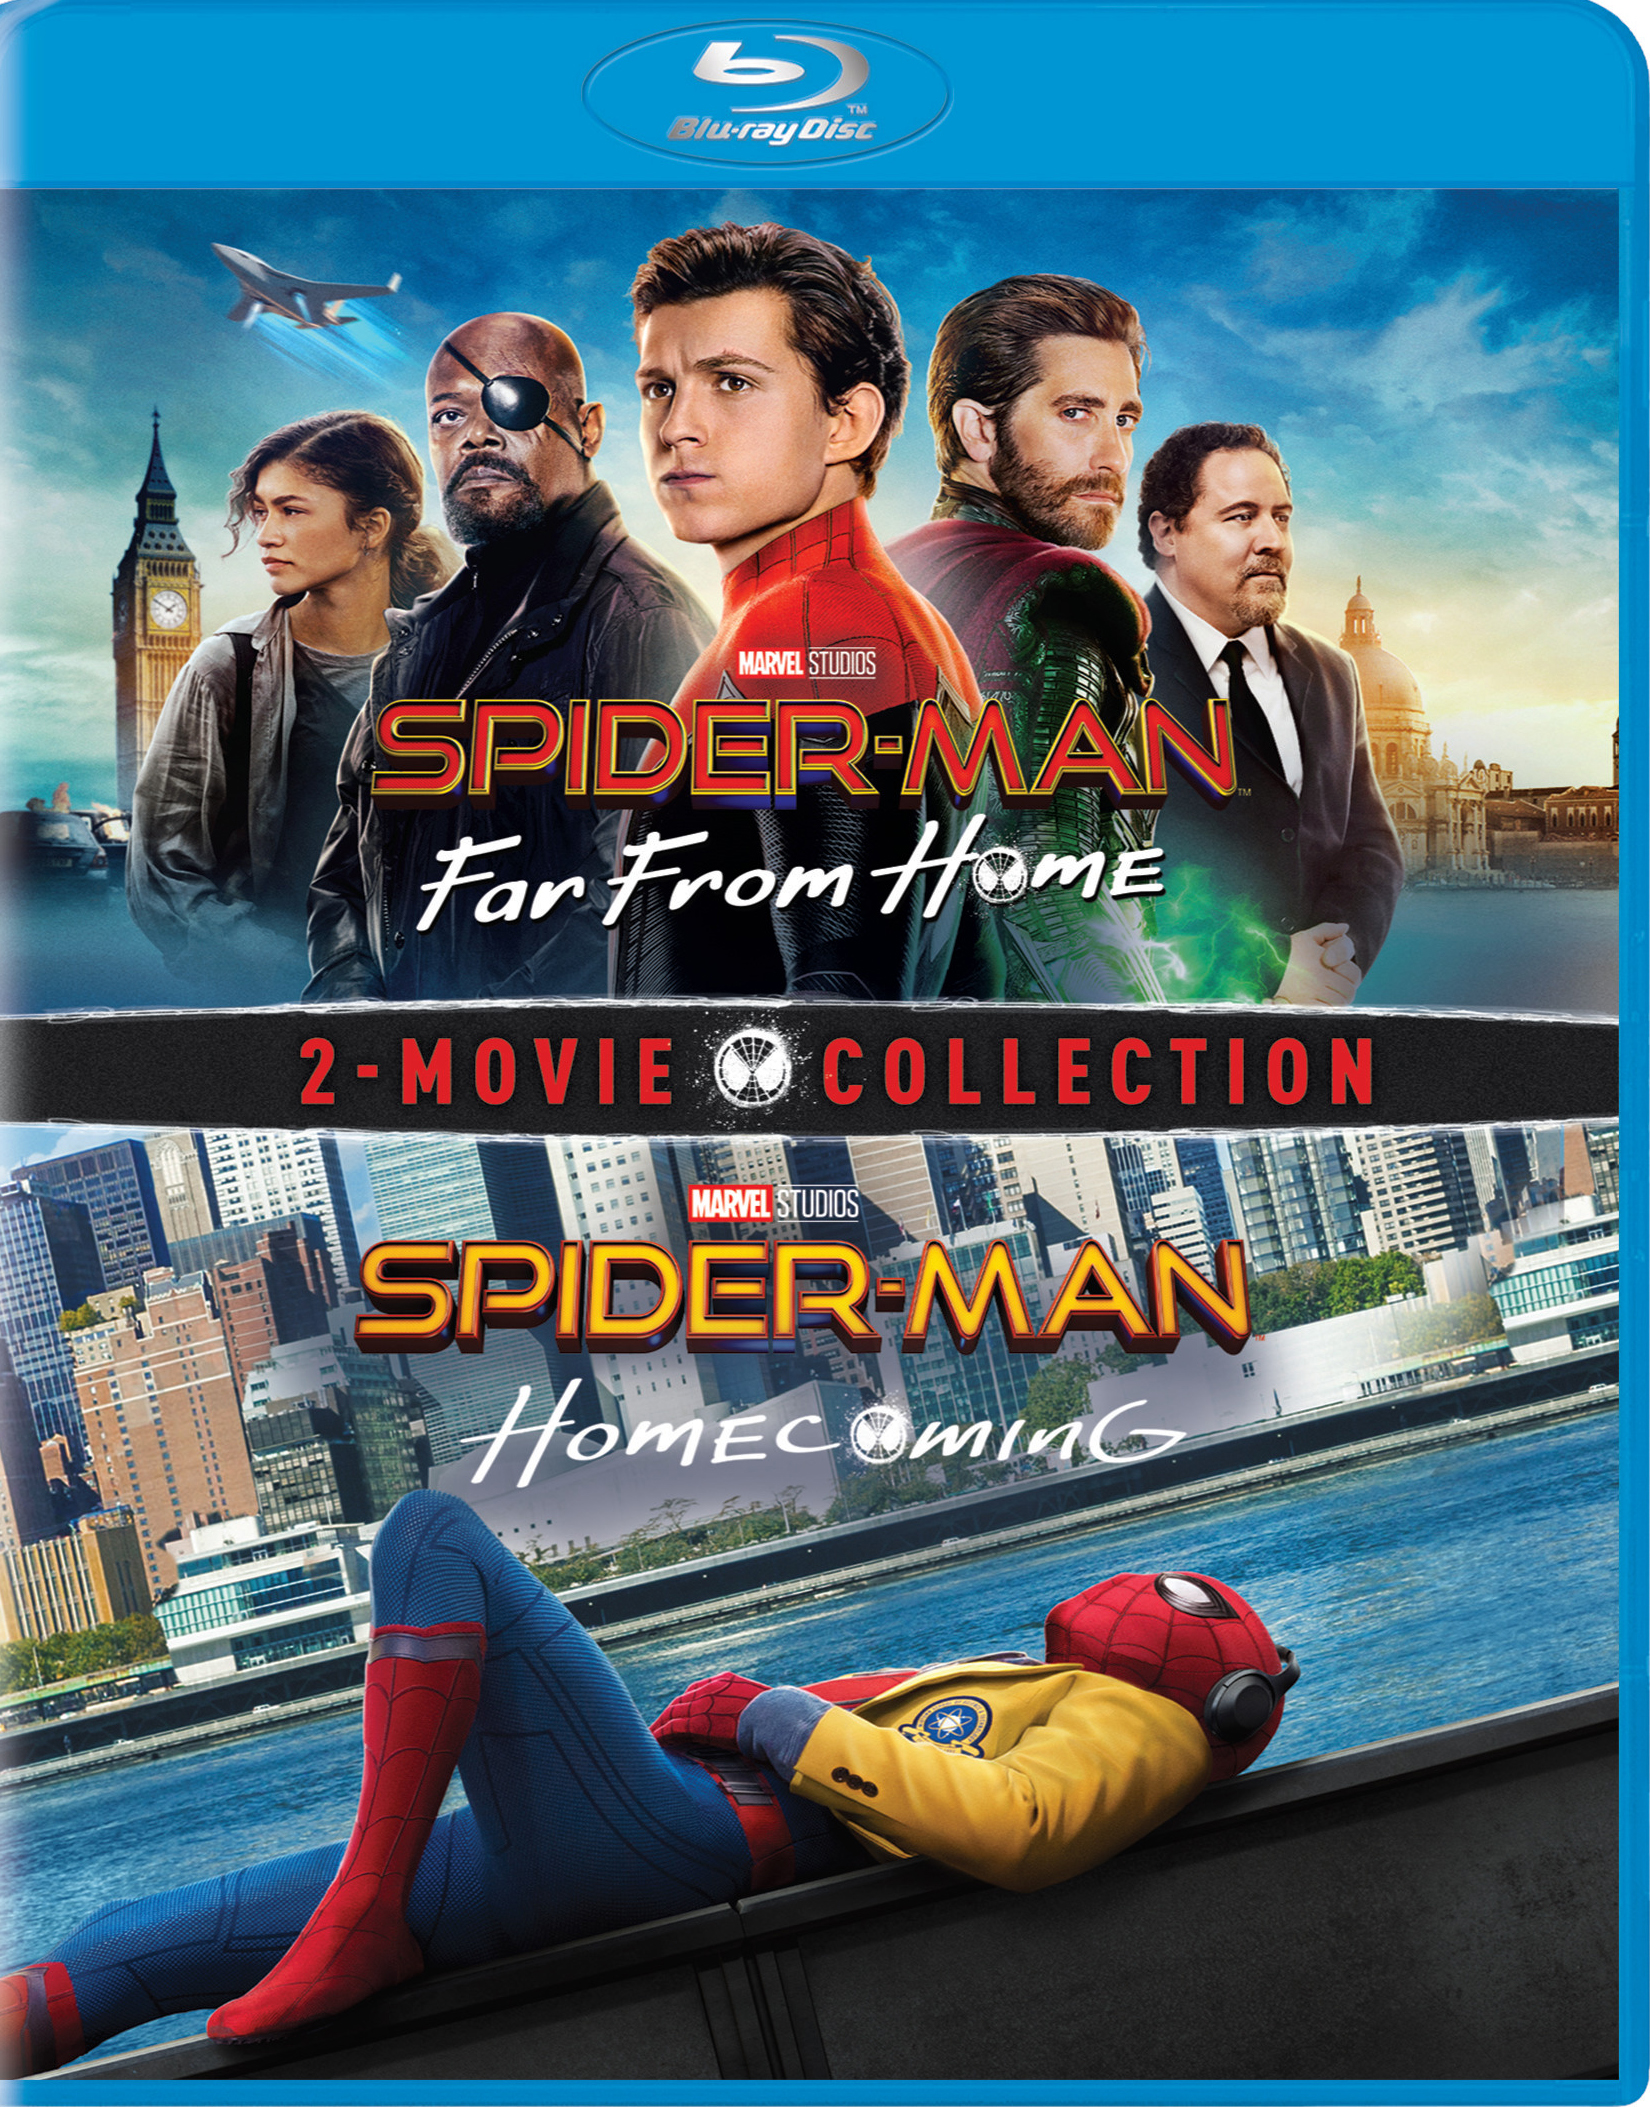 Review: 'Spider-Man: Far From Home' Is the Latest Iron Man Movie